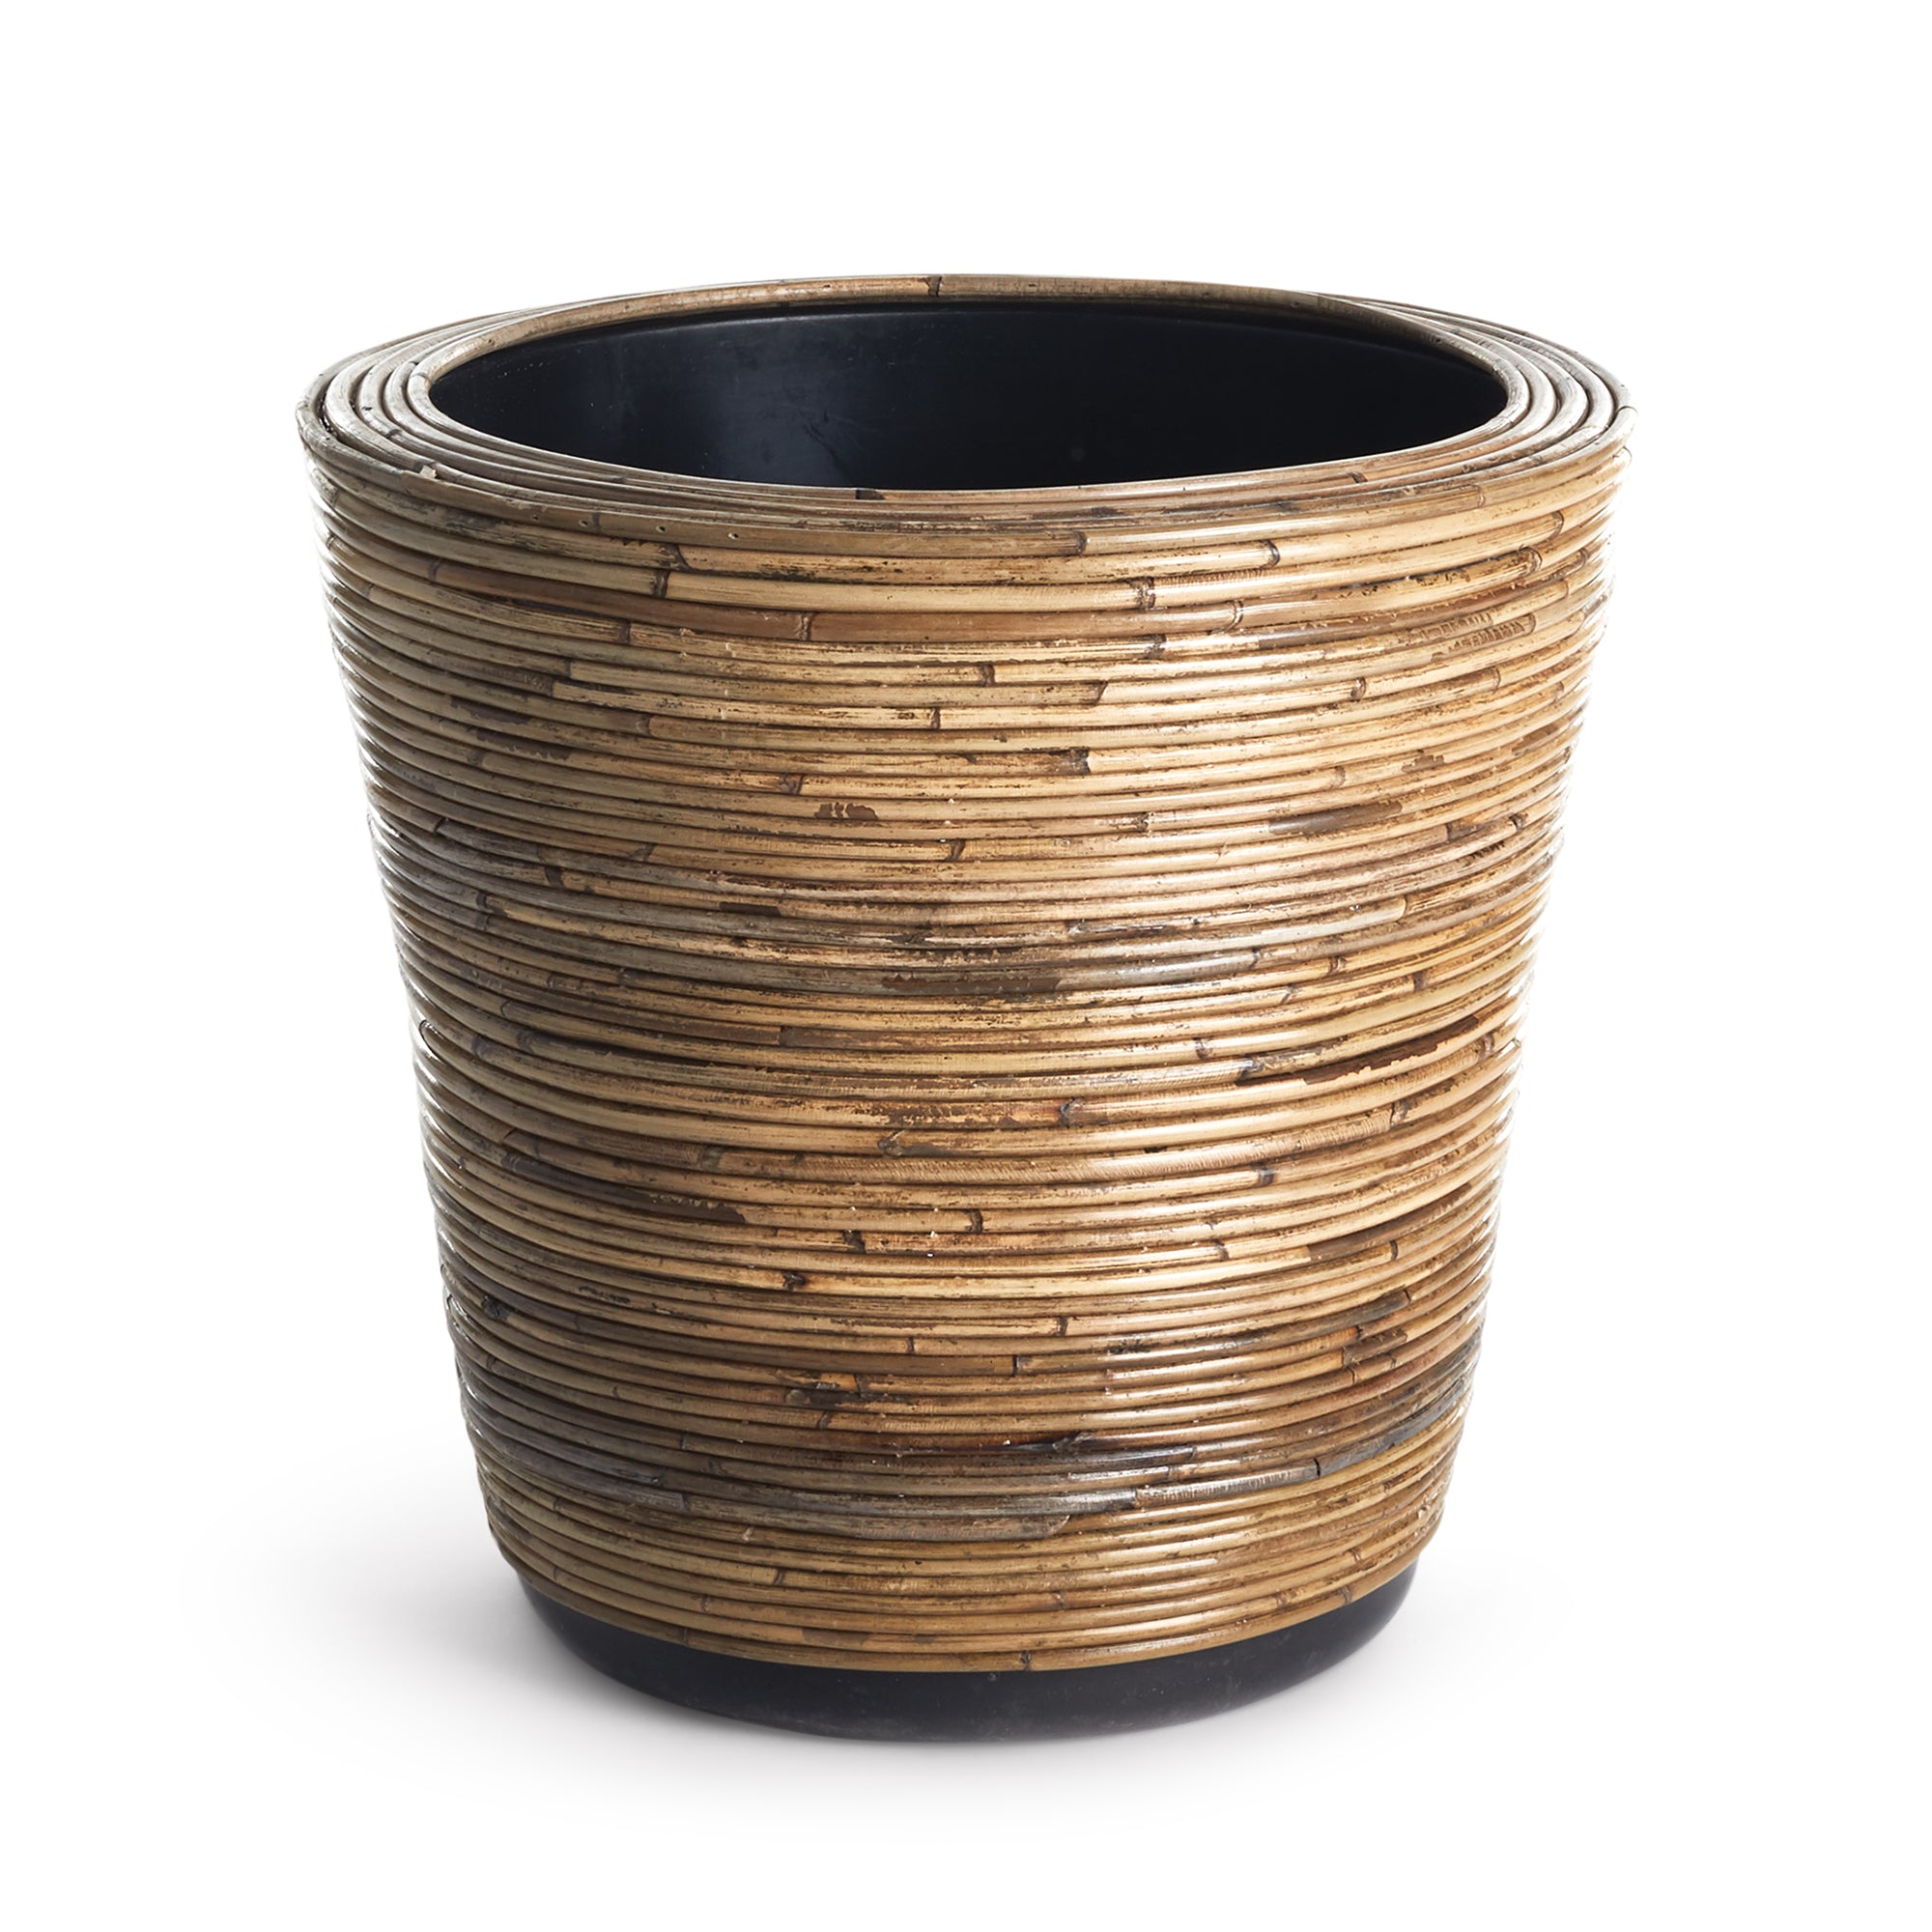 Balling Categorie Panter Napa Home And Garden Wrapped Dry Basket Planter 17.75" - Ivy Home